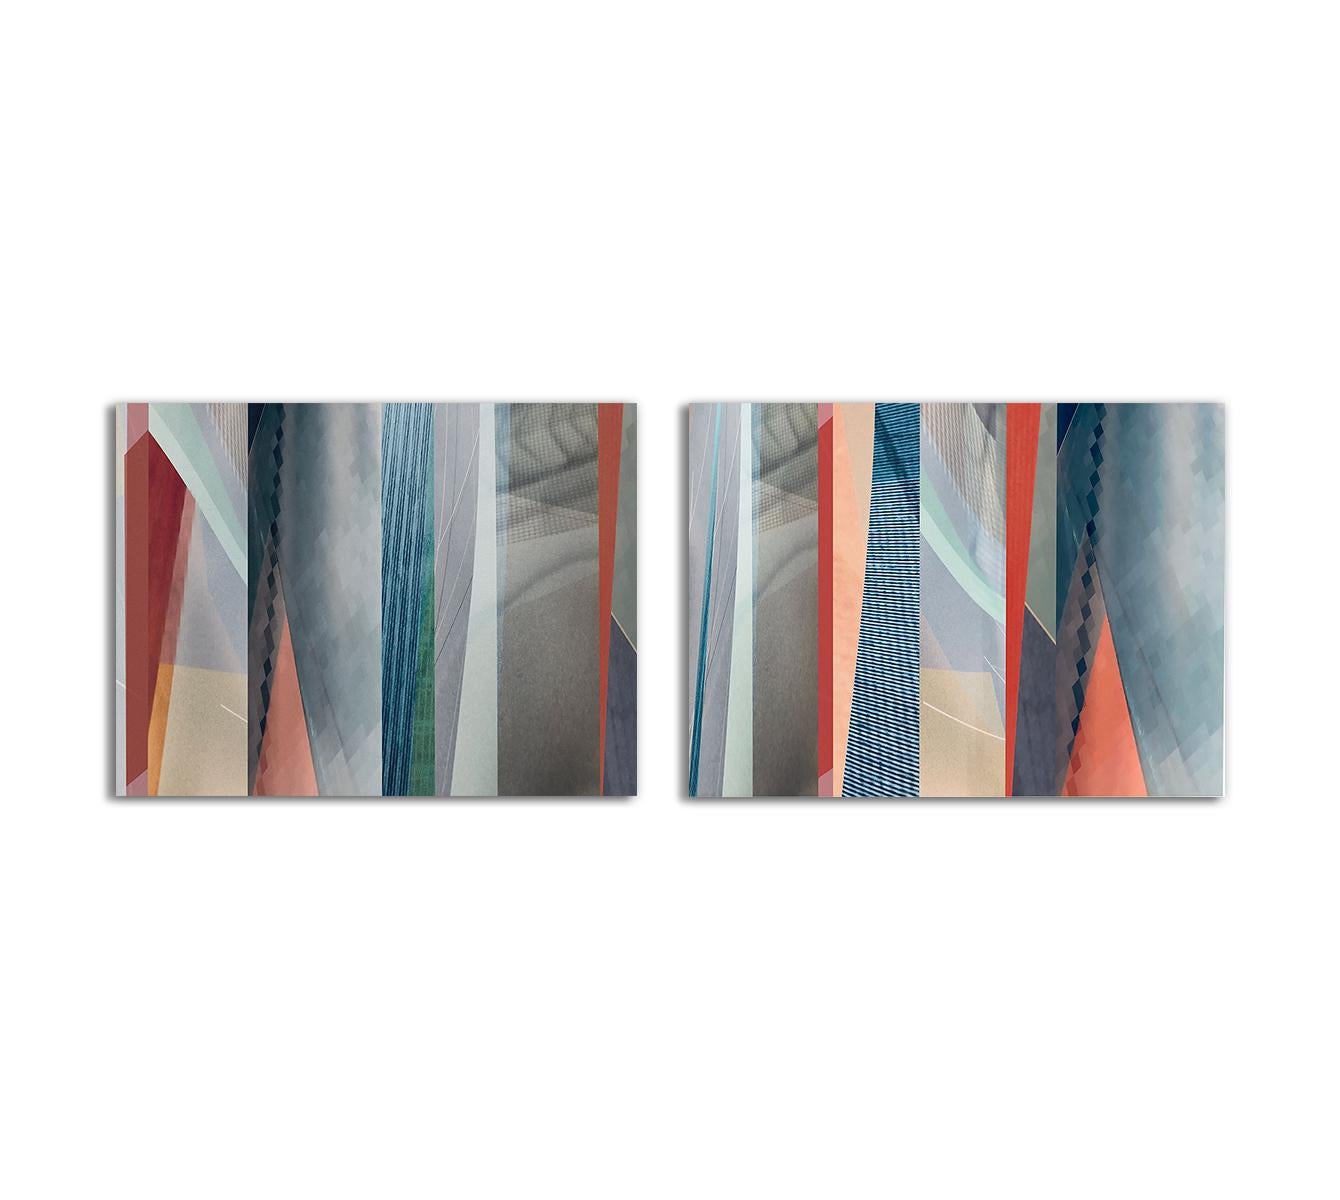 Monika Bravo Color Photograph - Parallel Fields #4 and #5. Abstract limited edition color photograph